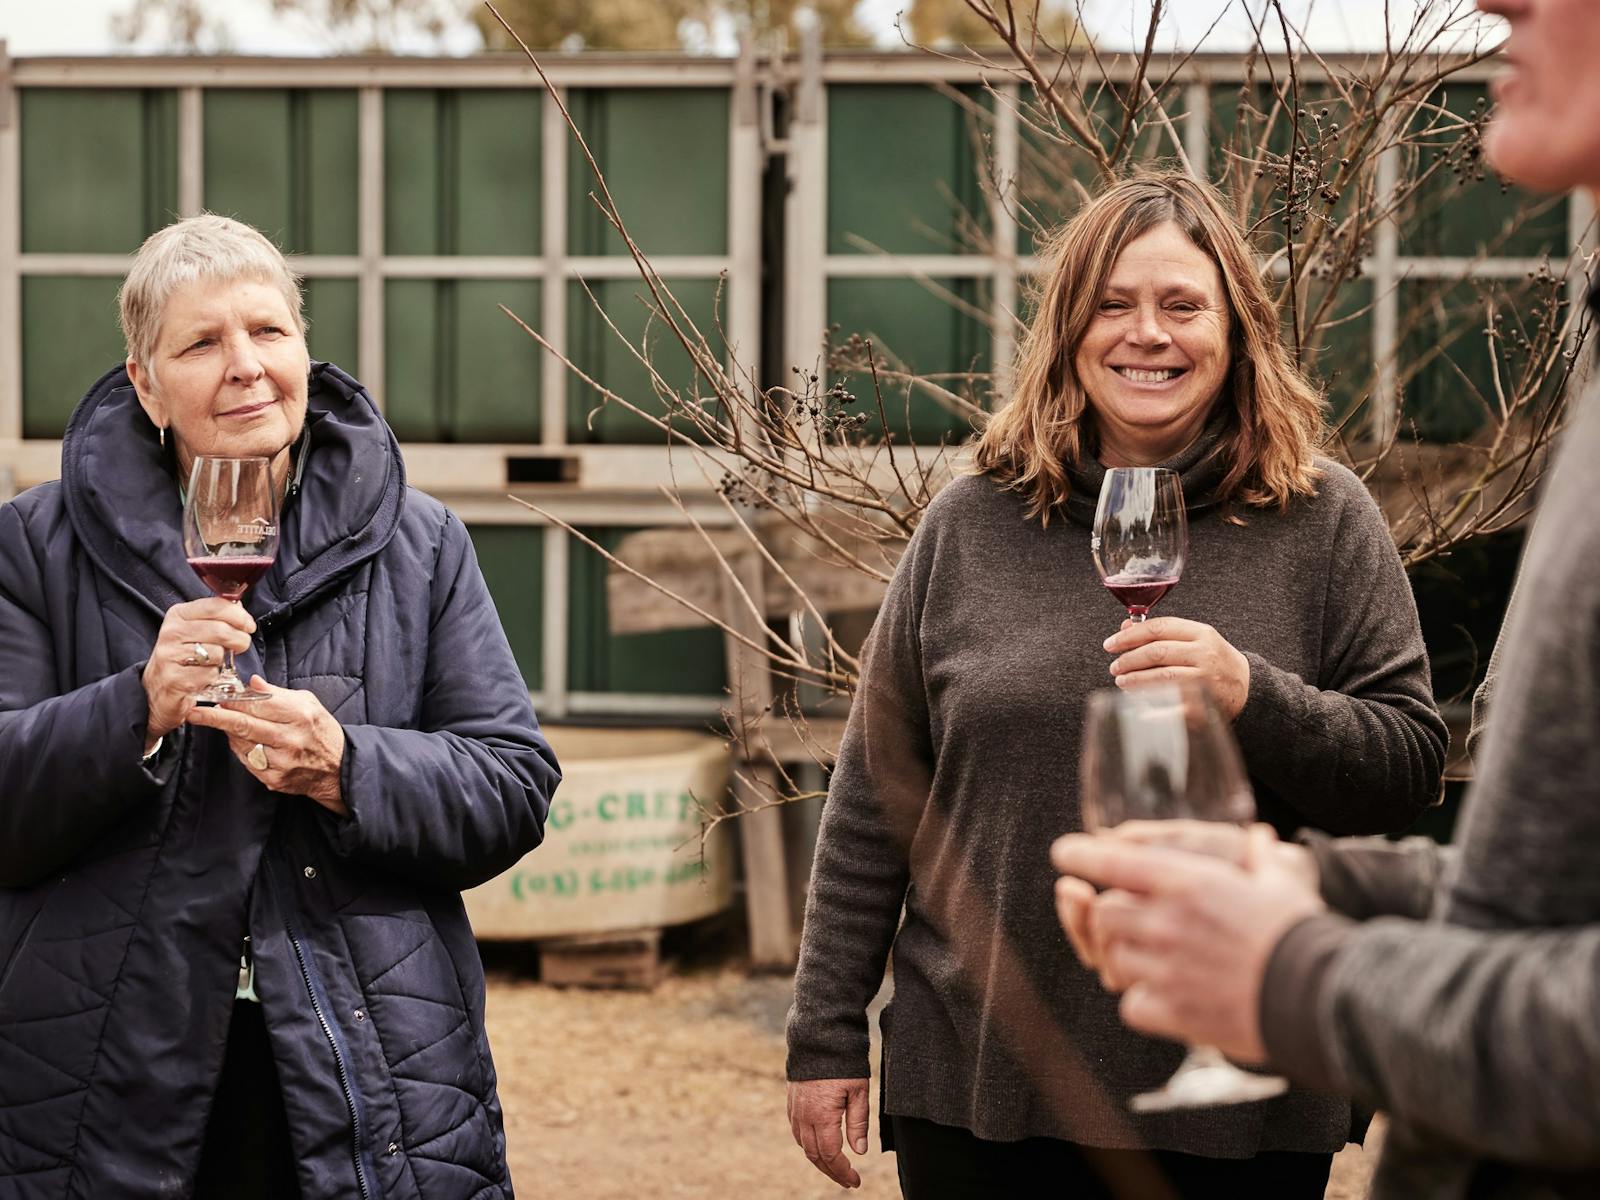 Three people standing outside holding wine glasses